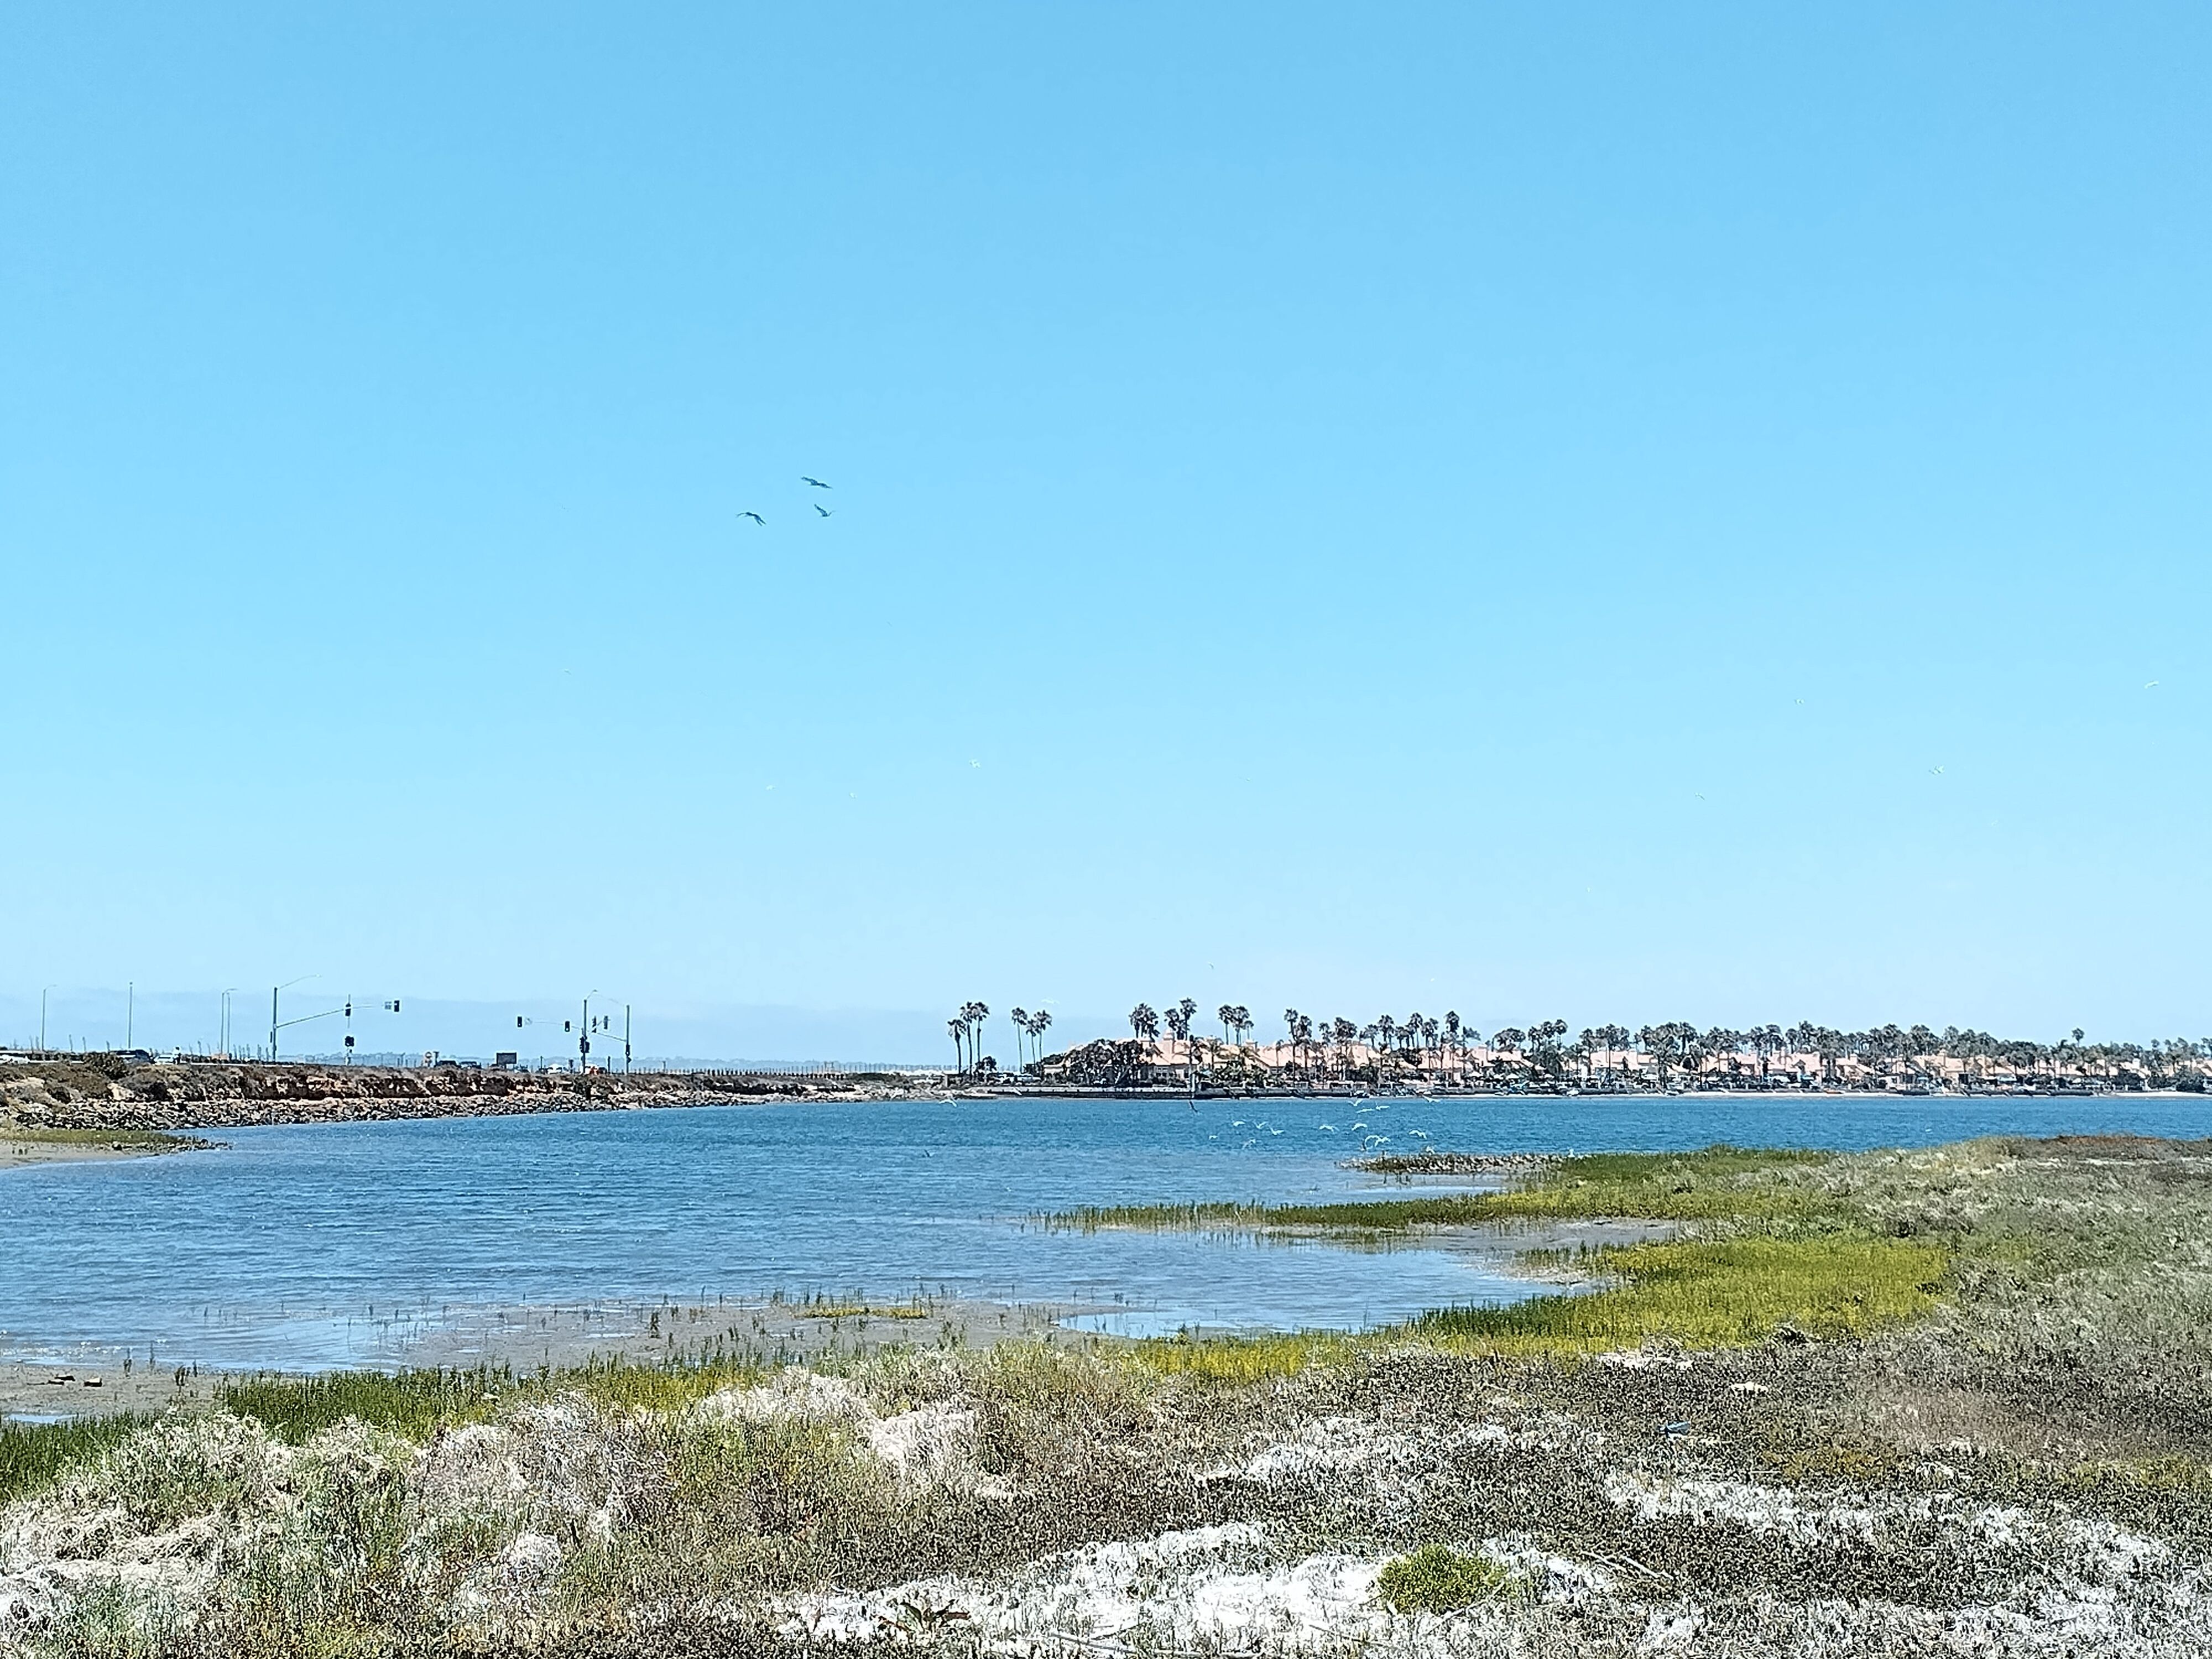 View of the San Diego Bay from Emory Cove